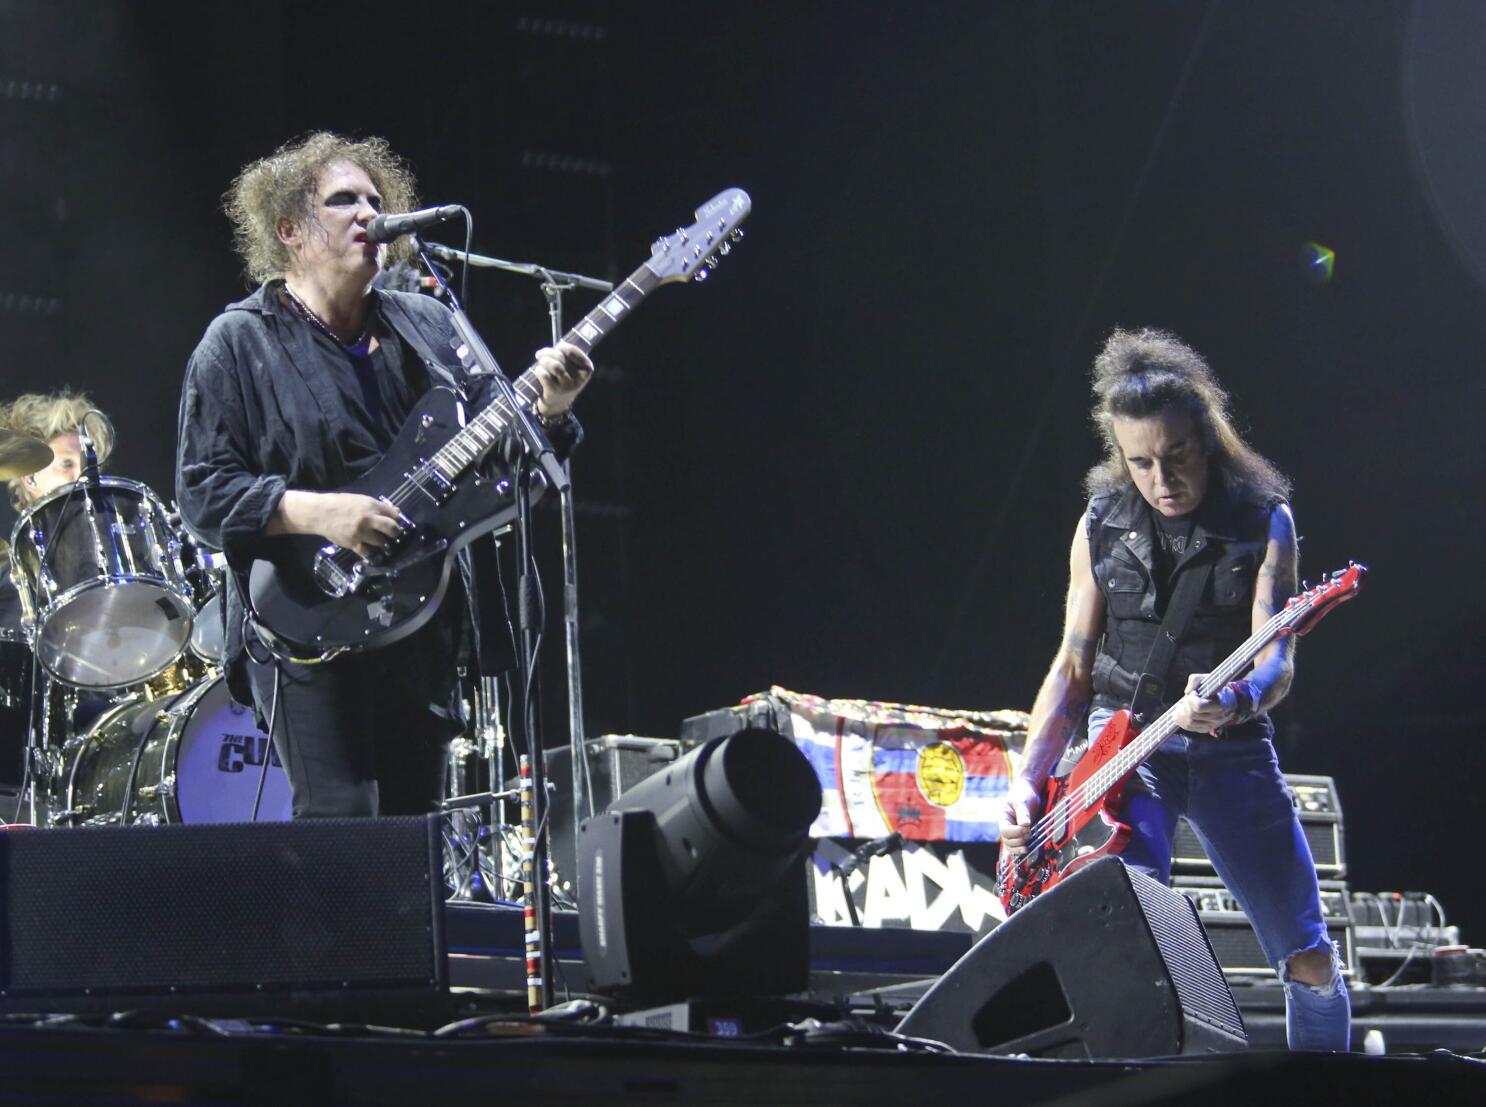 The Cure's Simon Gallup Says He's No Longer In The Band: “Just Got